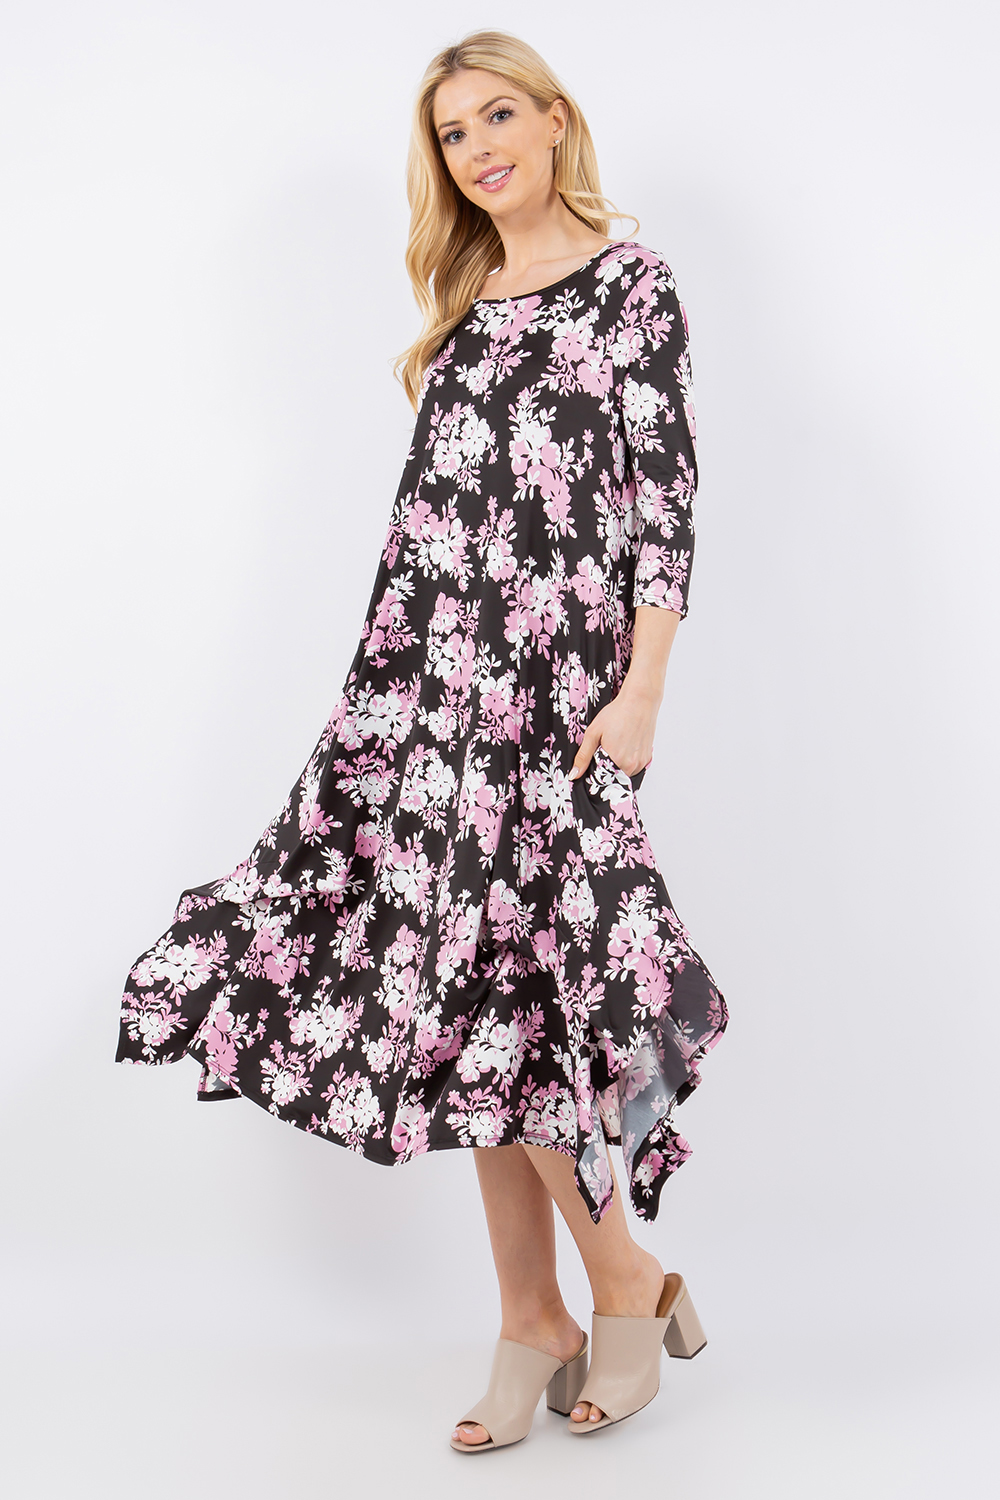 CD43771G<br/>FLORAL PRINT LAYERED BOTTOM DRESS WITH POCKETS